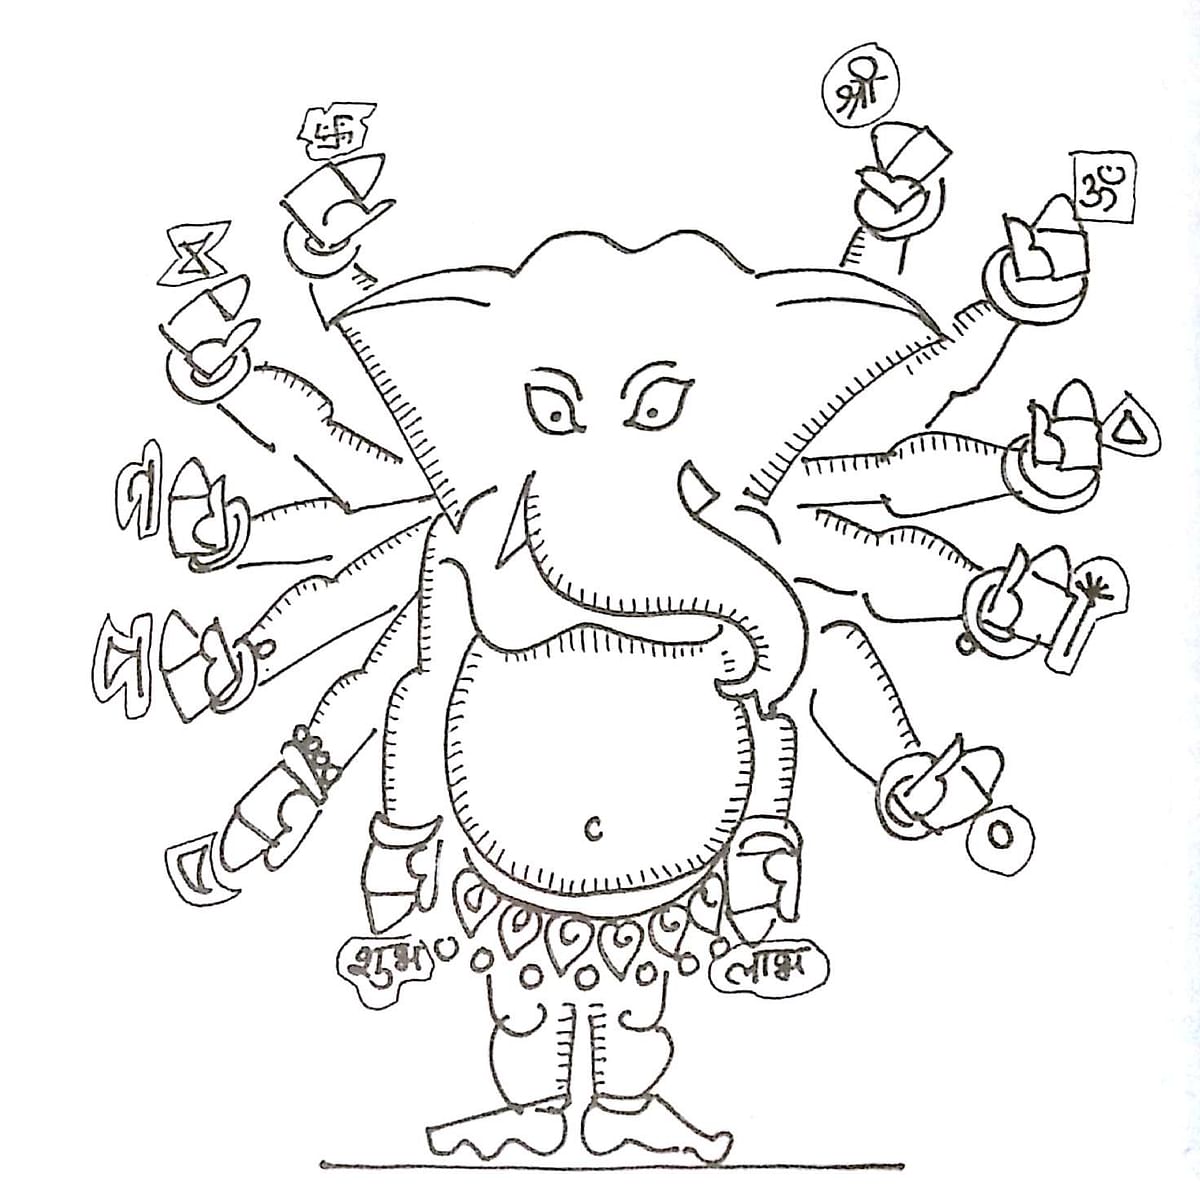 Devdutt Pattanaik explains the annual arrival and departure of Lord Ganesha and  its connection with our lives.